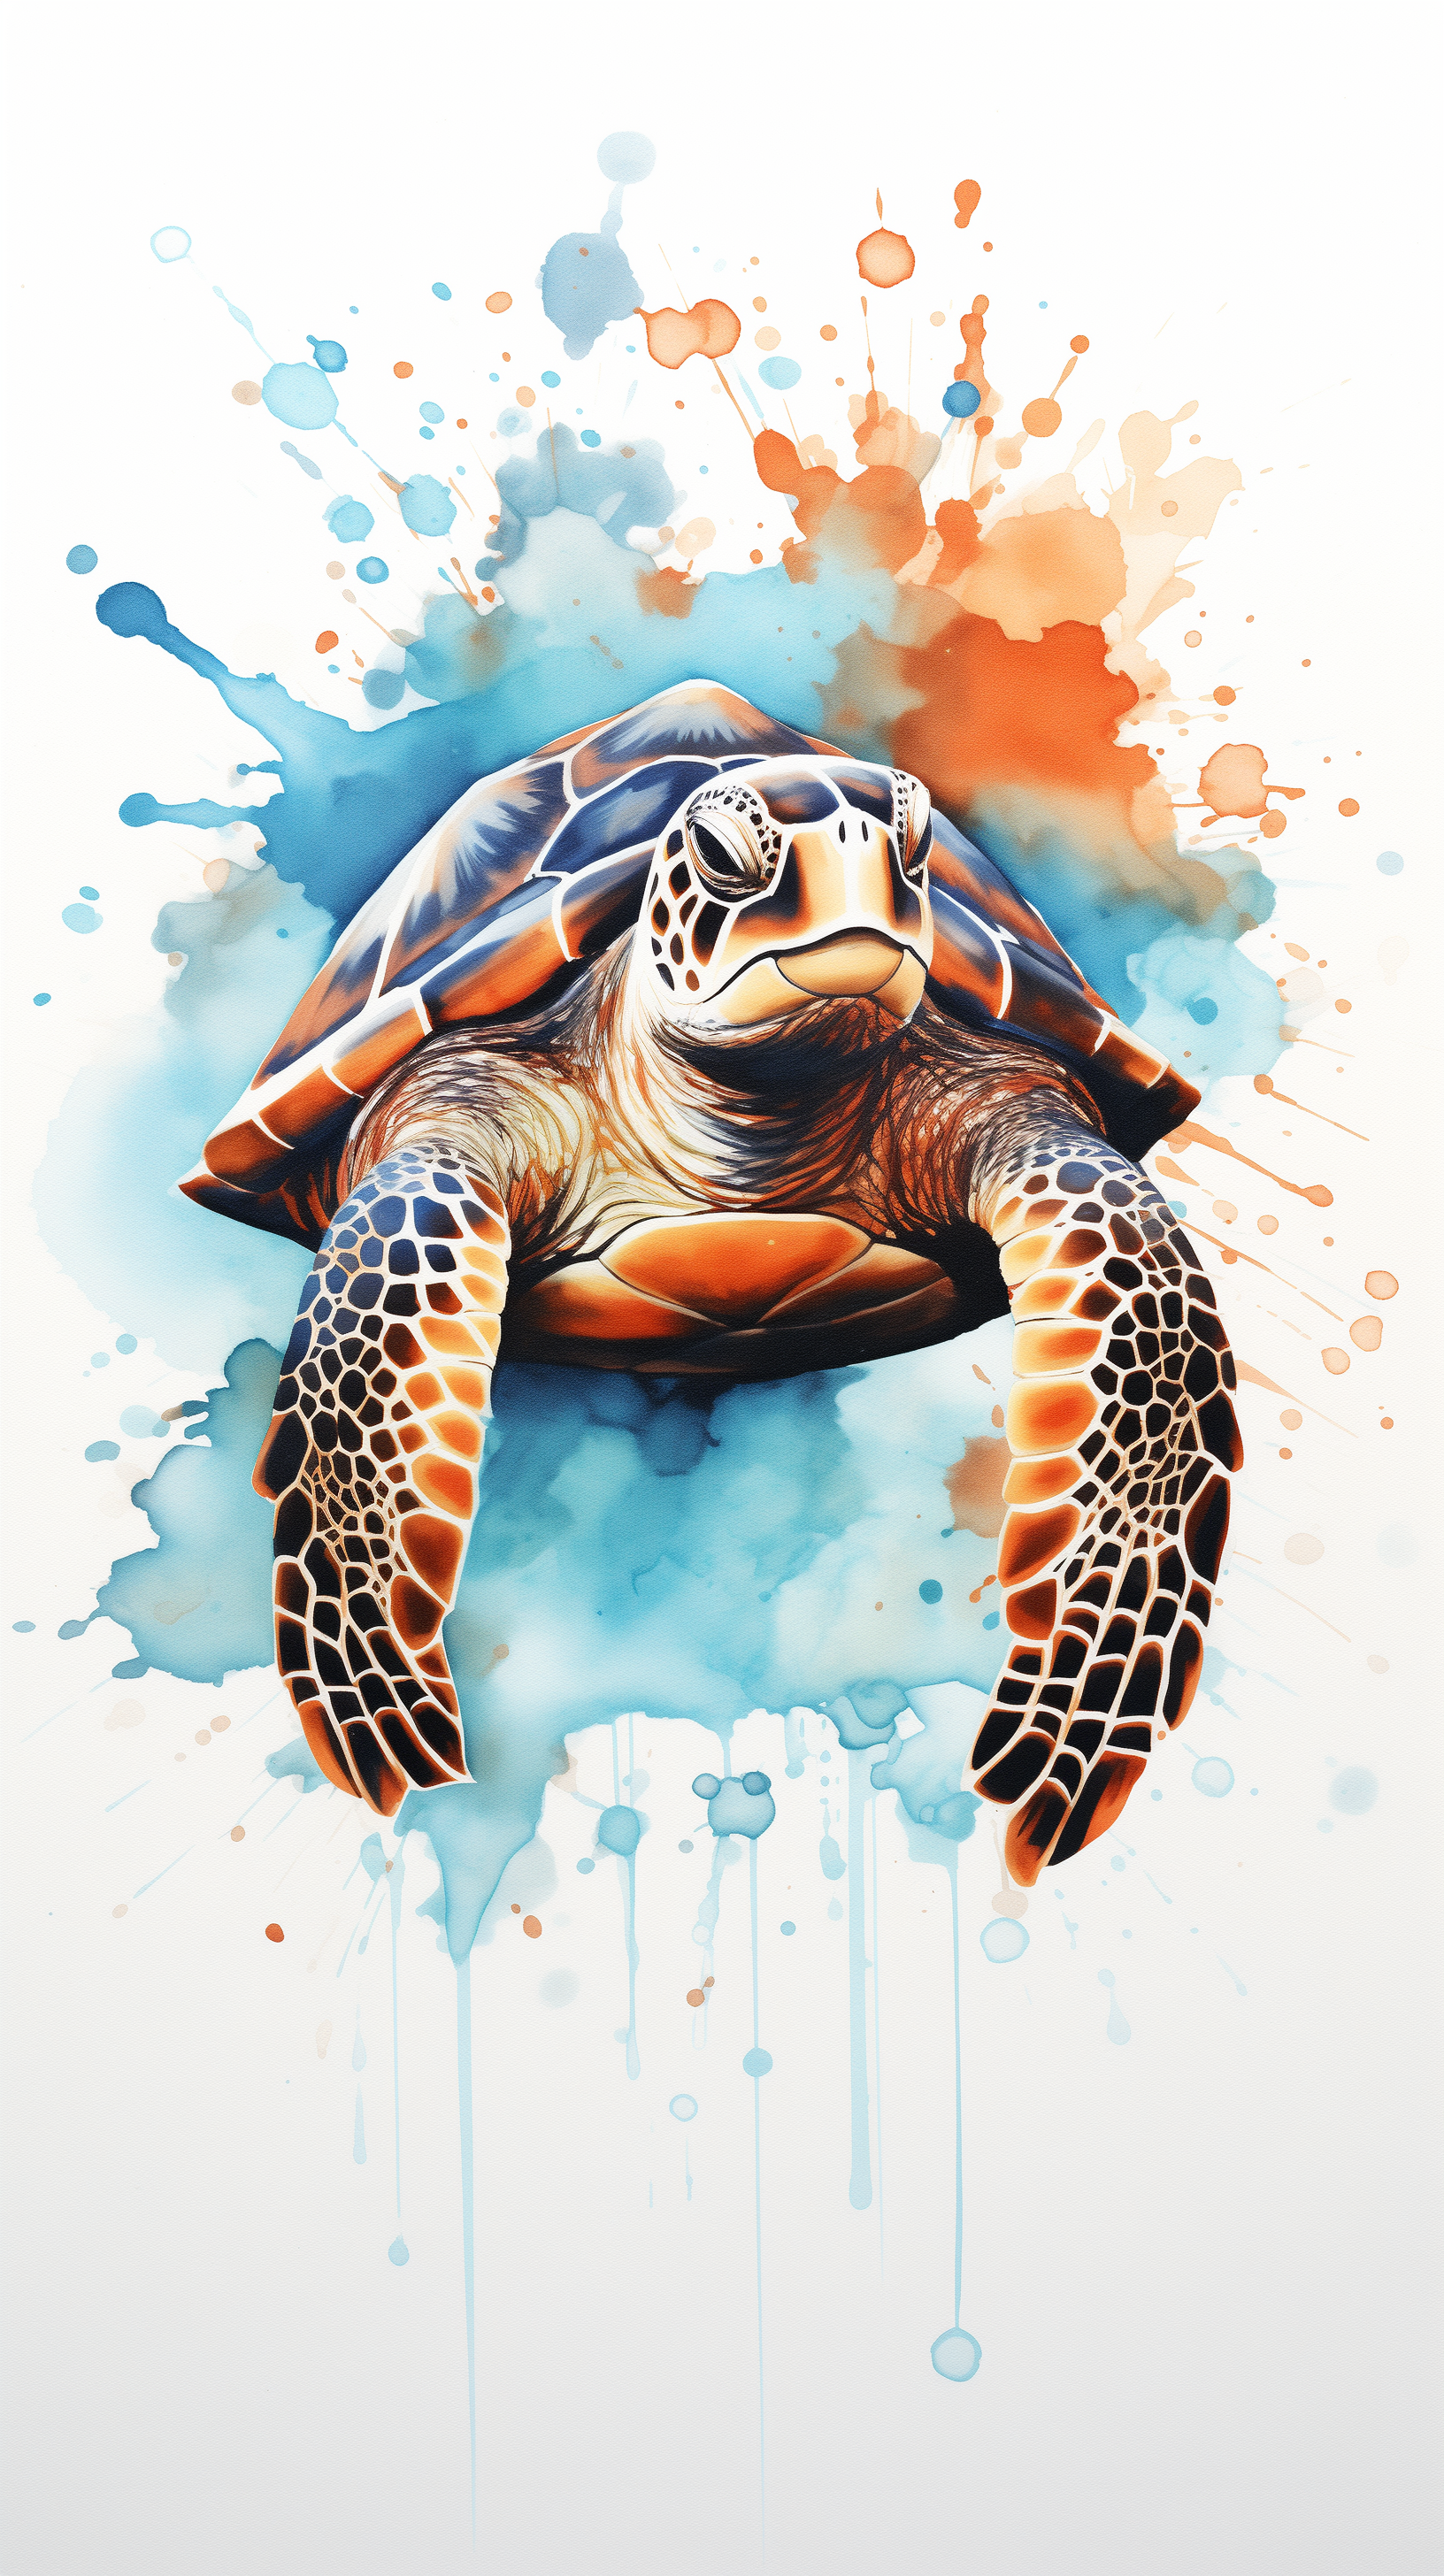 Colorful artistic sea turtle illustration with splashes of blue and orange, perfect for a vibrant phone wallpaper.